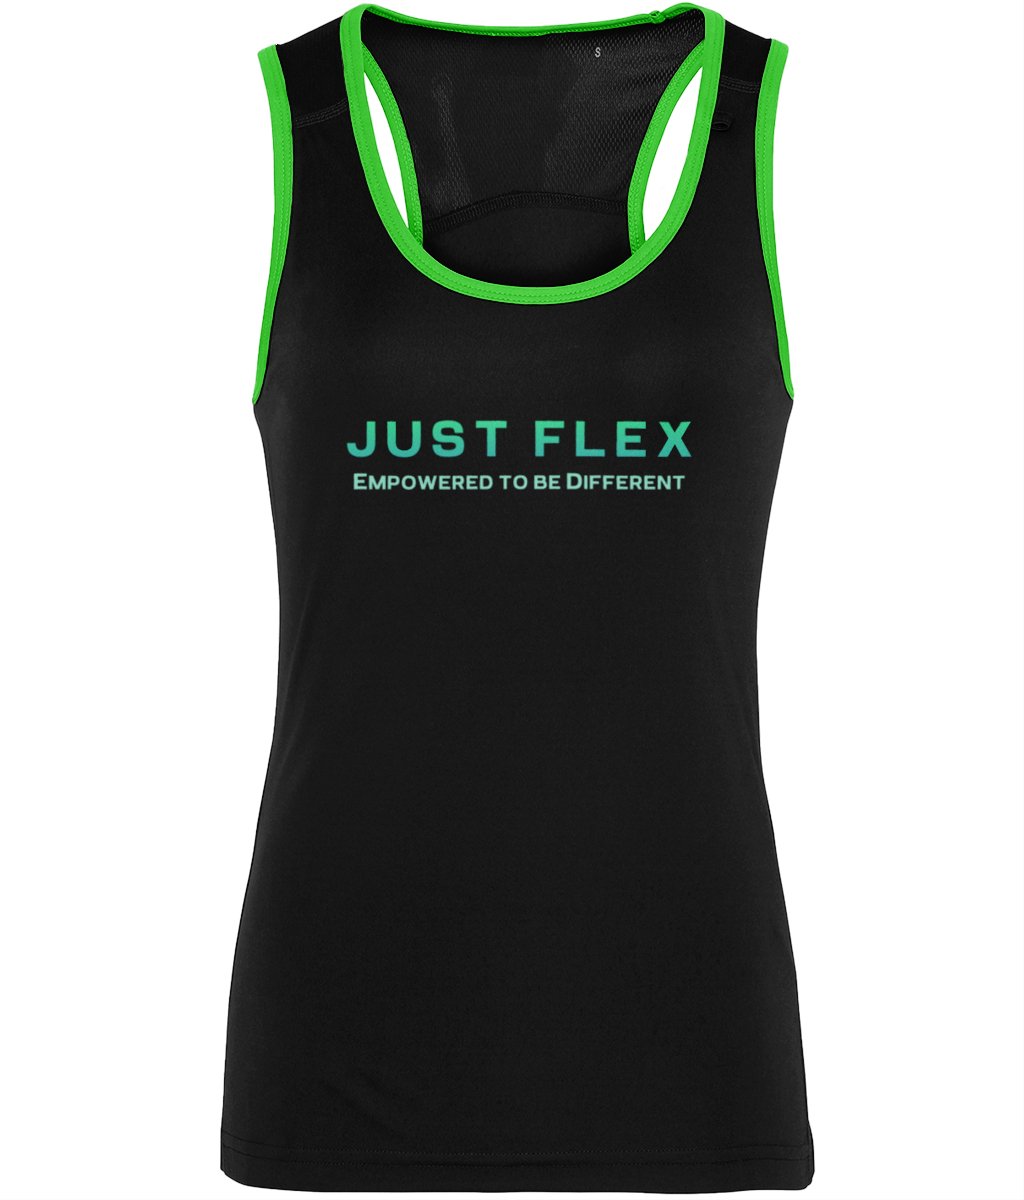 Just Flex - Empowered To Be Different Women's TriDri® Panelled Fitness Vest